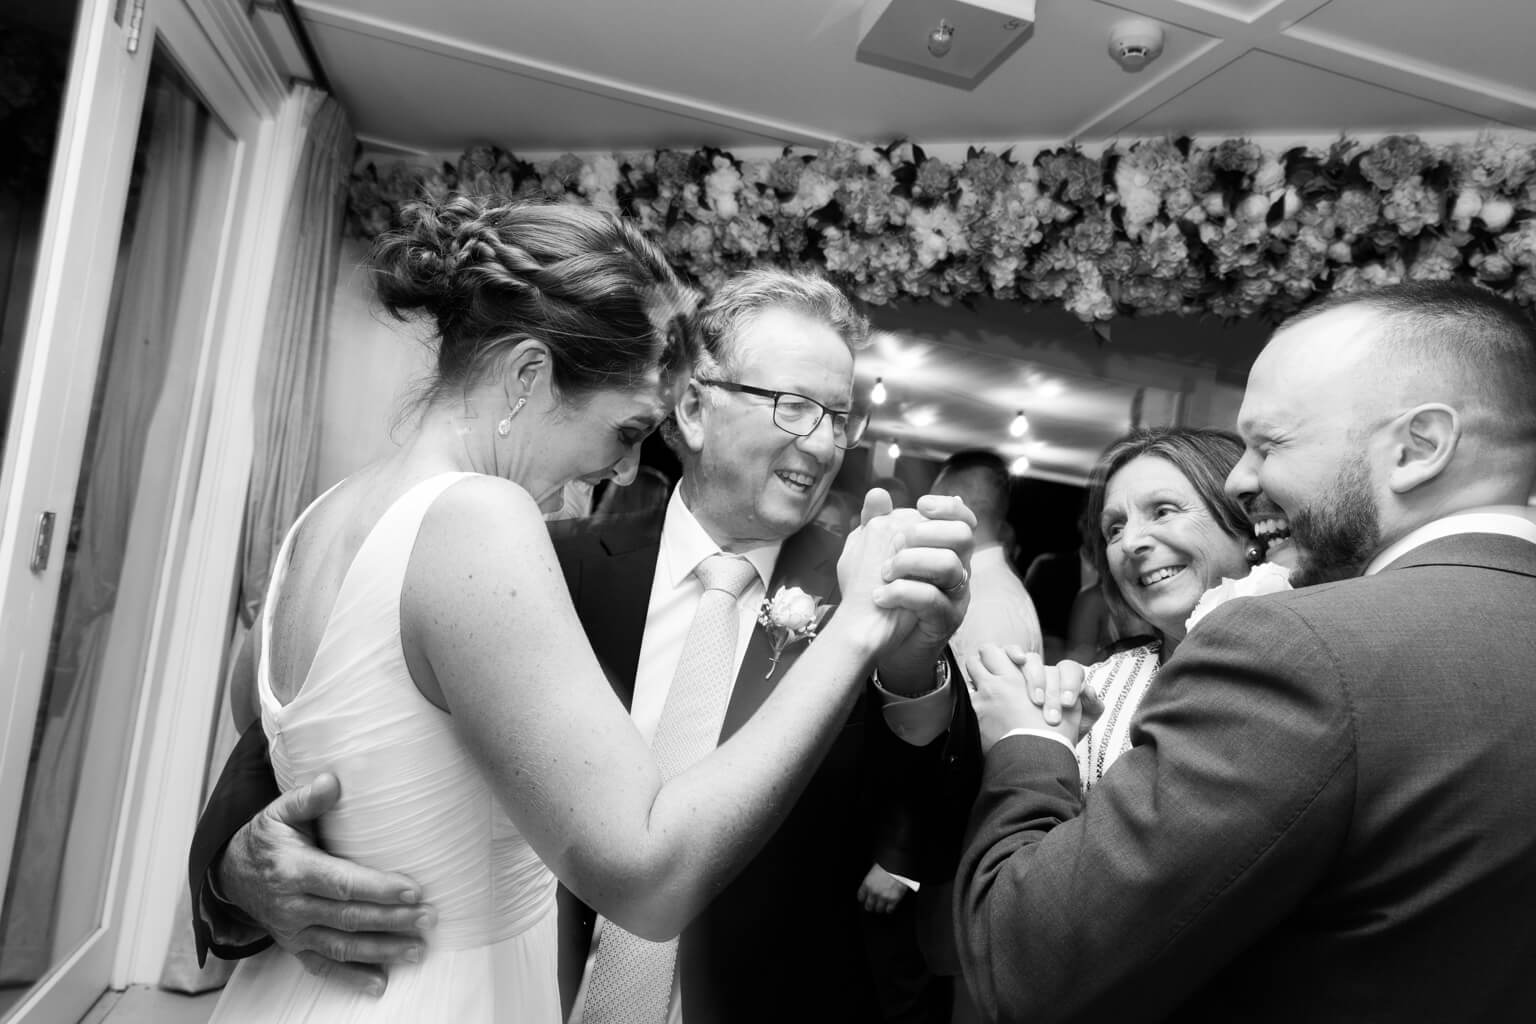 Bride and groom dancing wither her parents in black and white